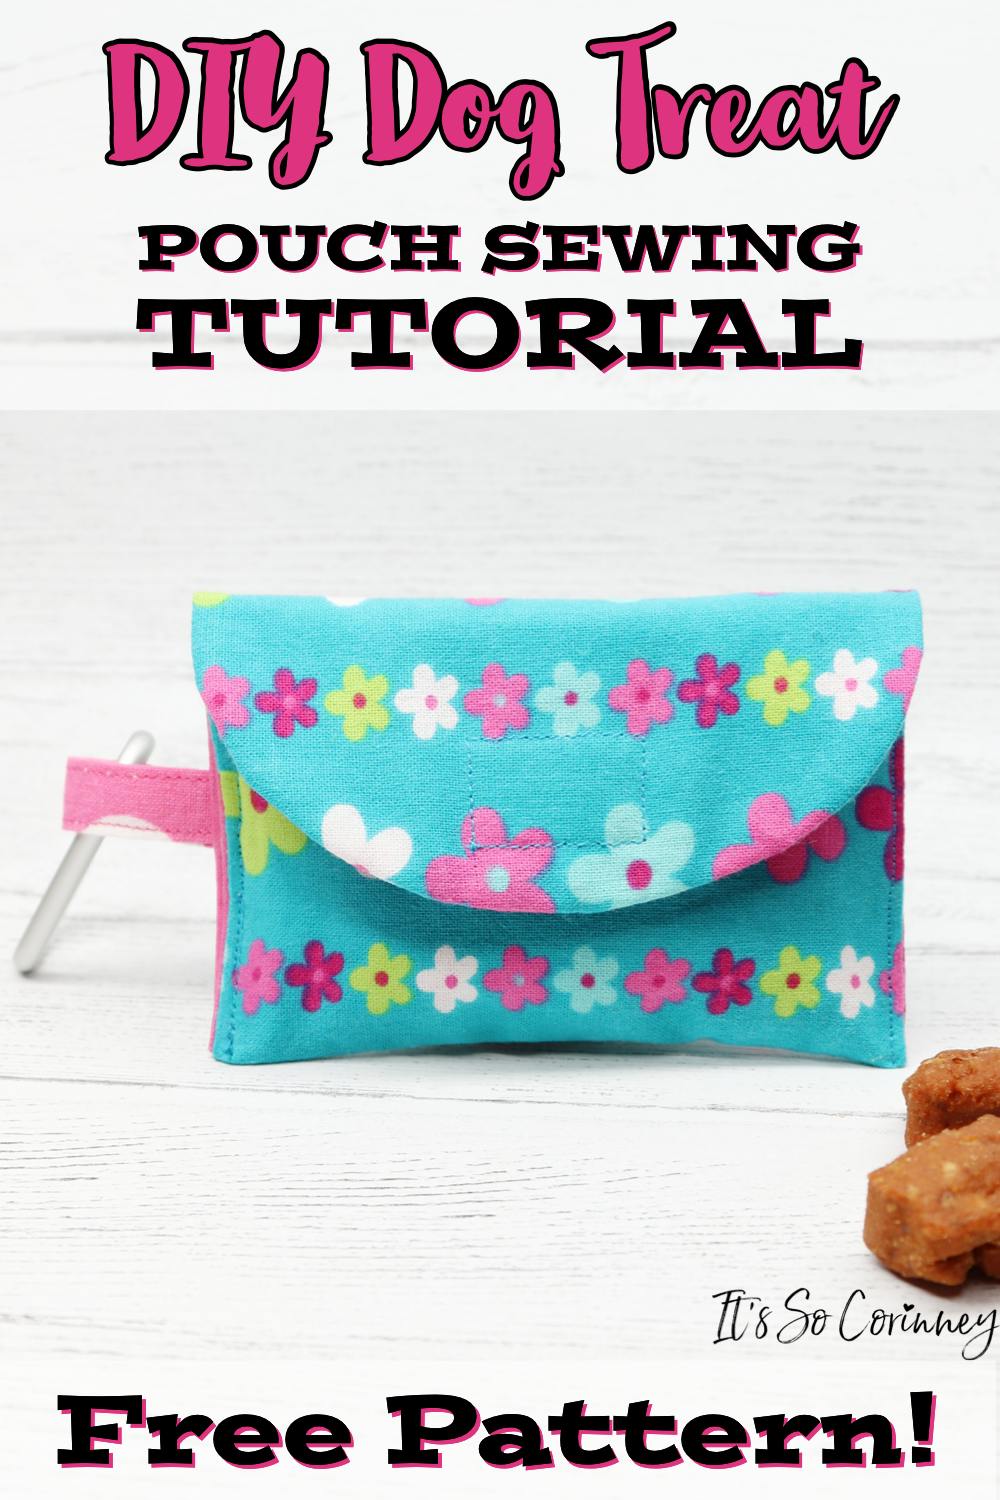 Sewing on a Machine, Basic Sewing Skills Tutorial, PDF Tutorial, Instant  Download 